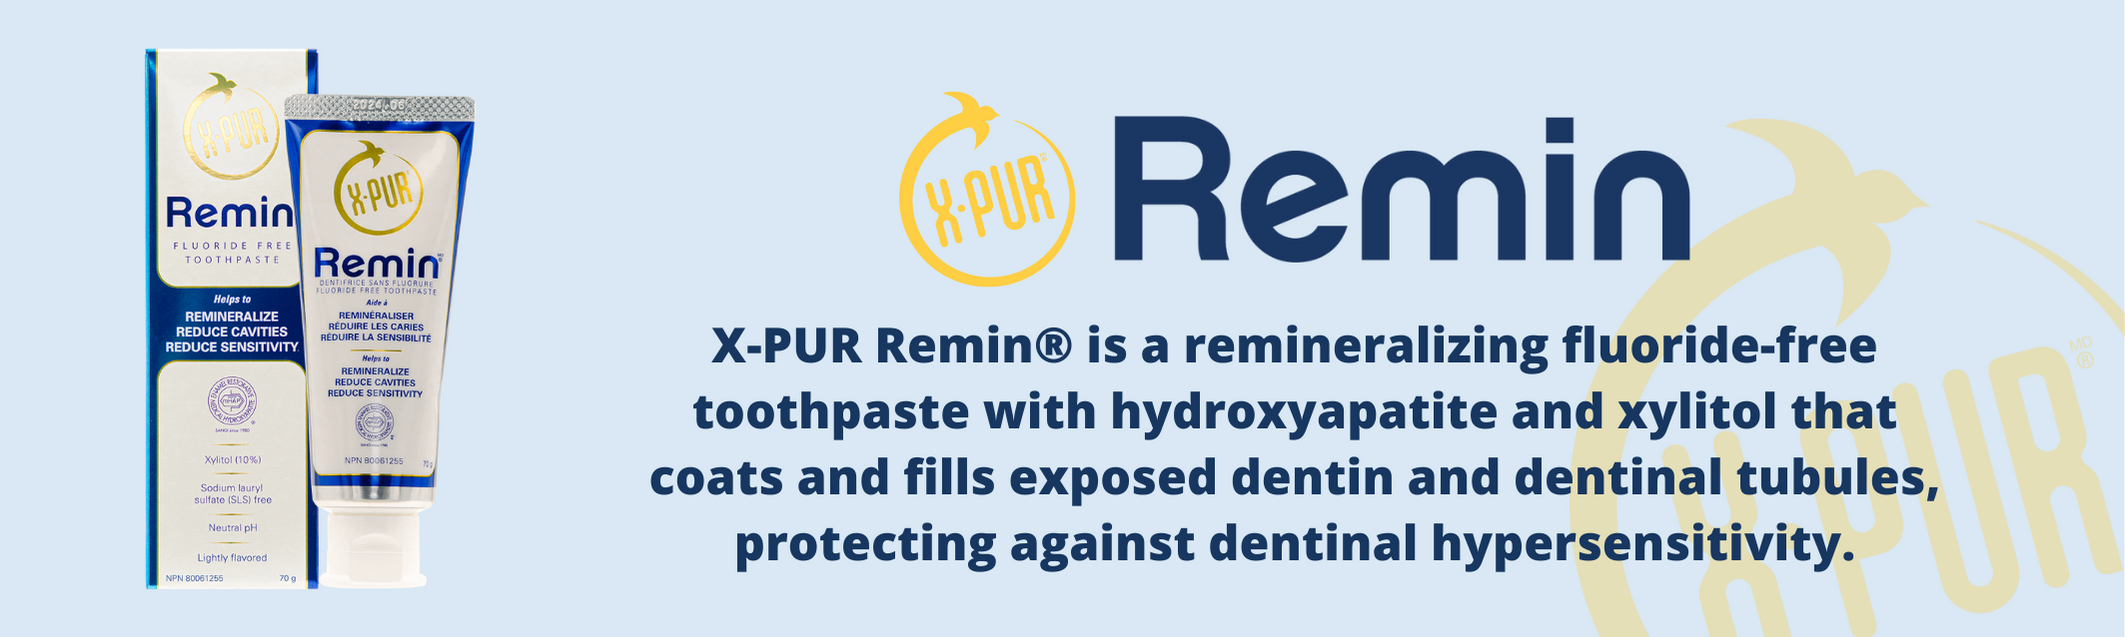 x-pur-remin-toothpaste